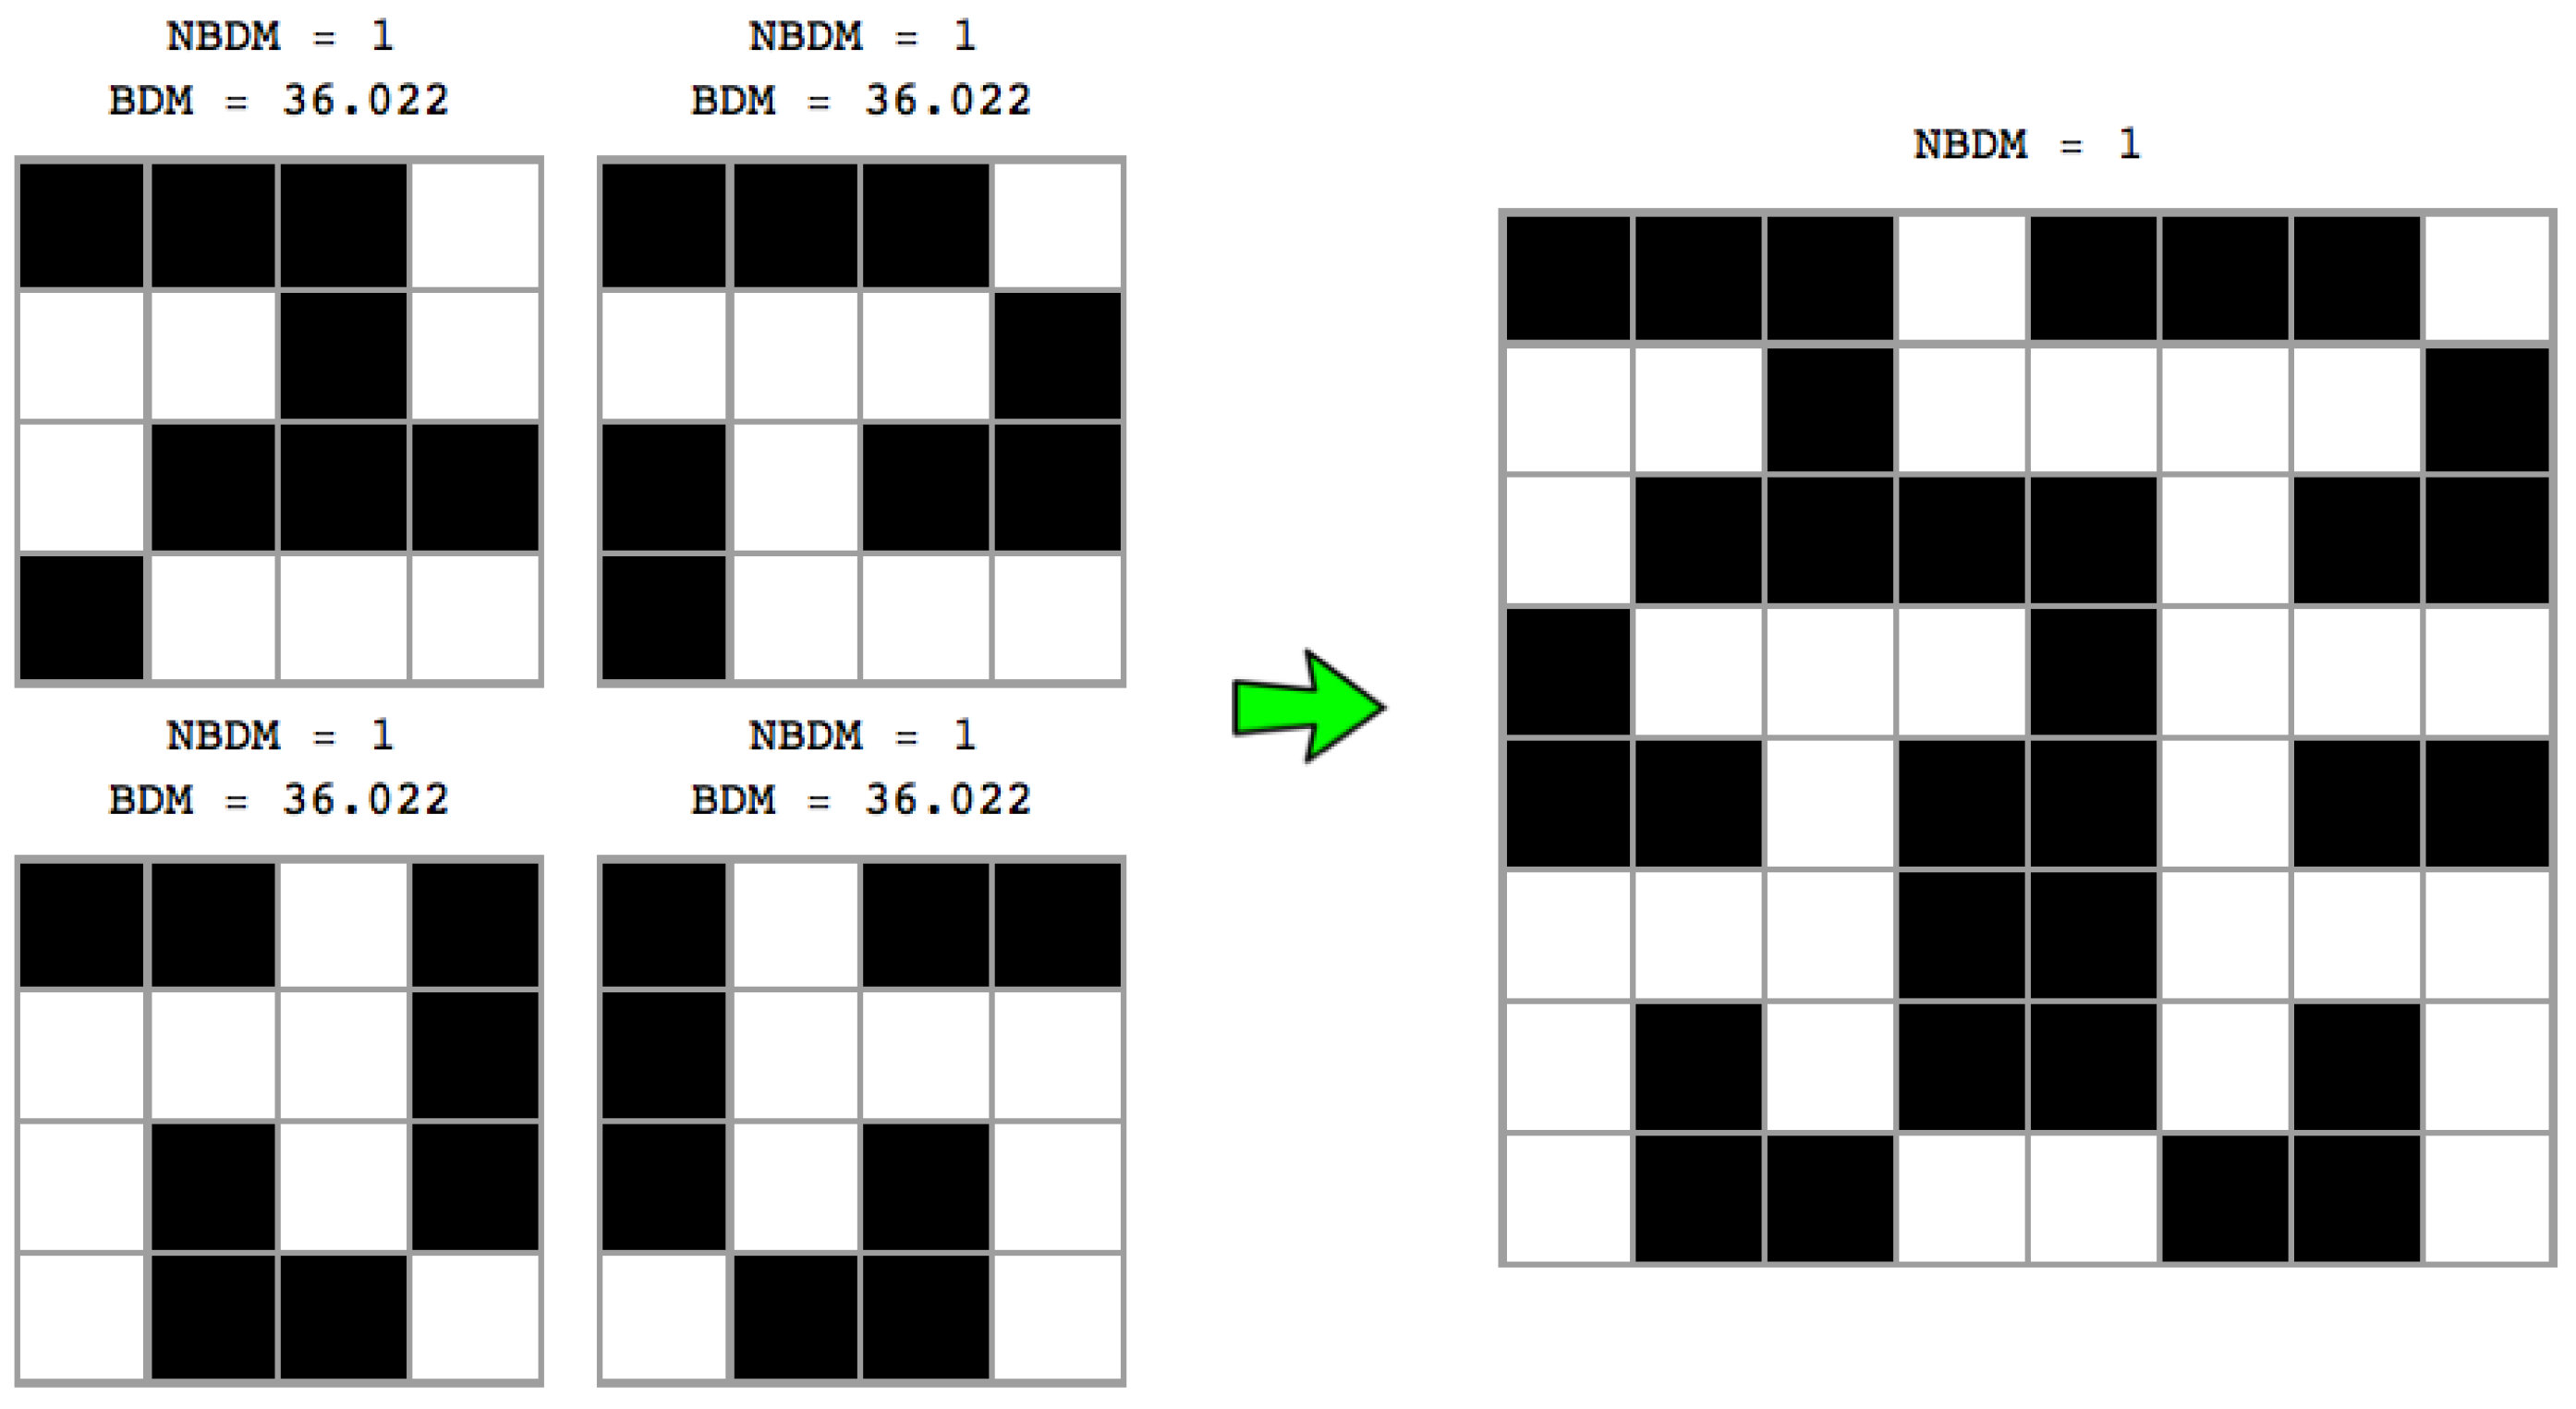 Kids' Cryptography with a Key from a Propositional Puzzle - Wolfram  Demonstrations Project